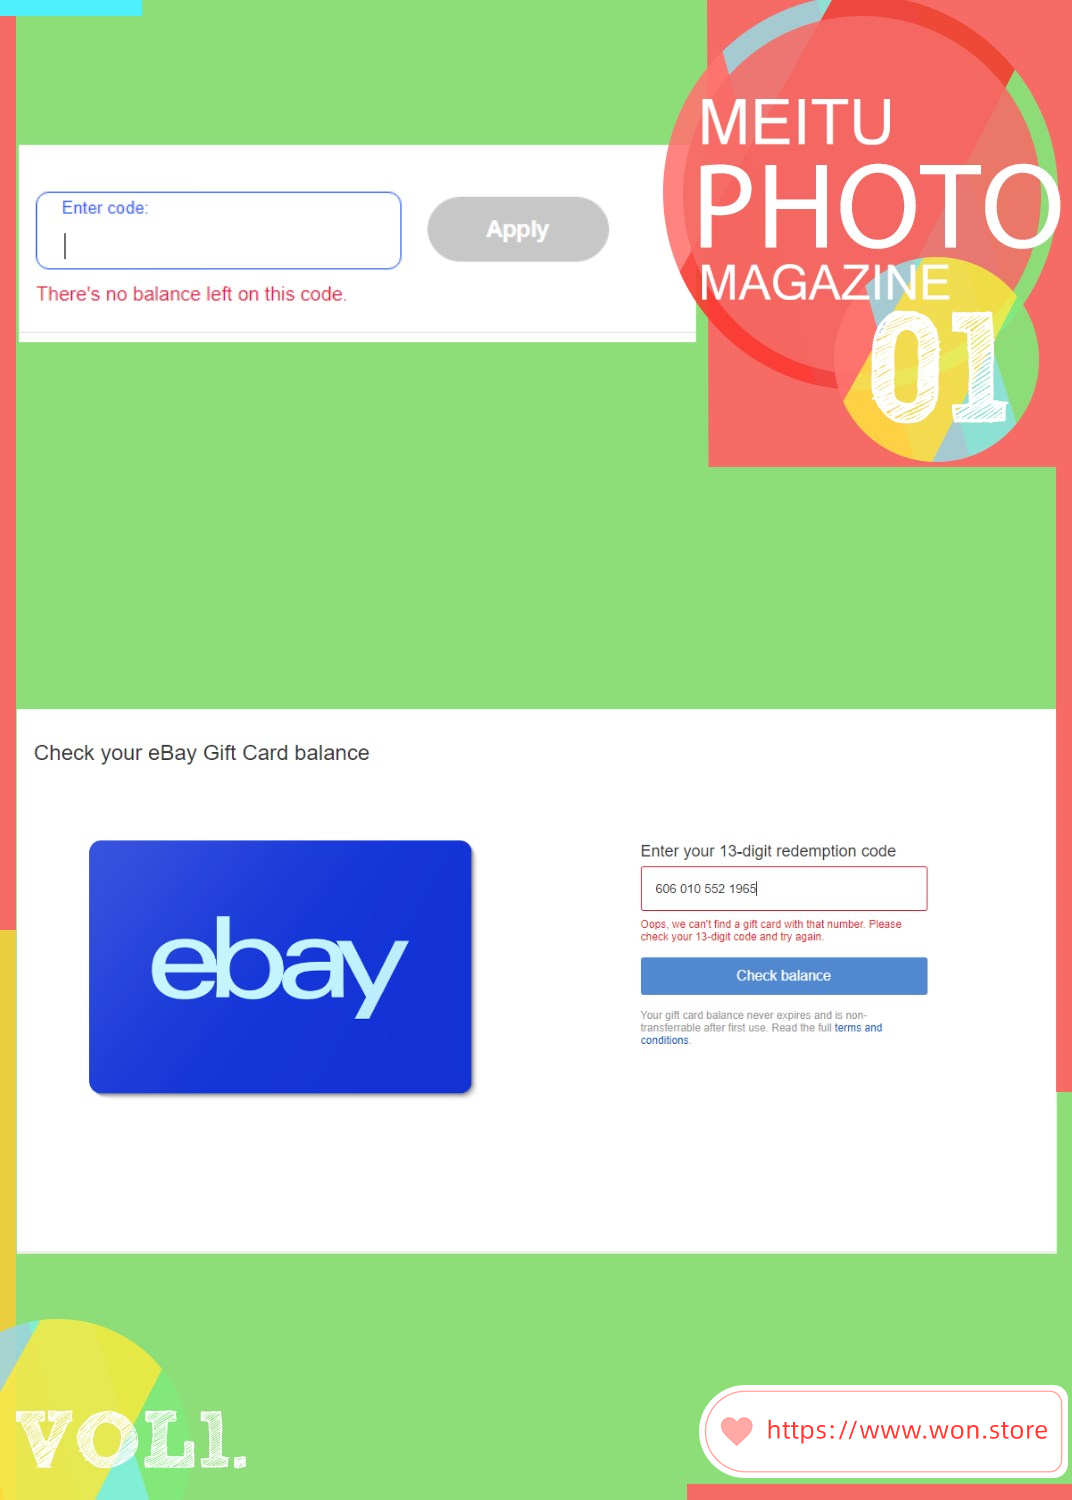 All You Need To Know About eBay Gift Card - Nosh